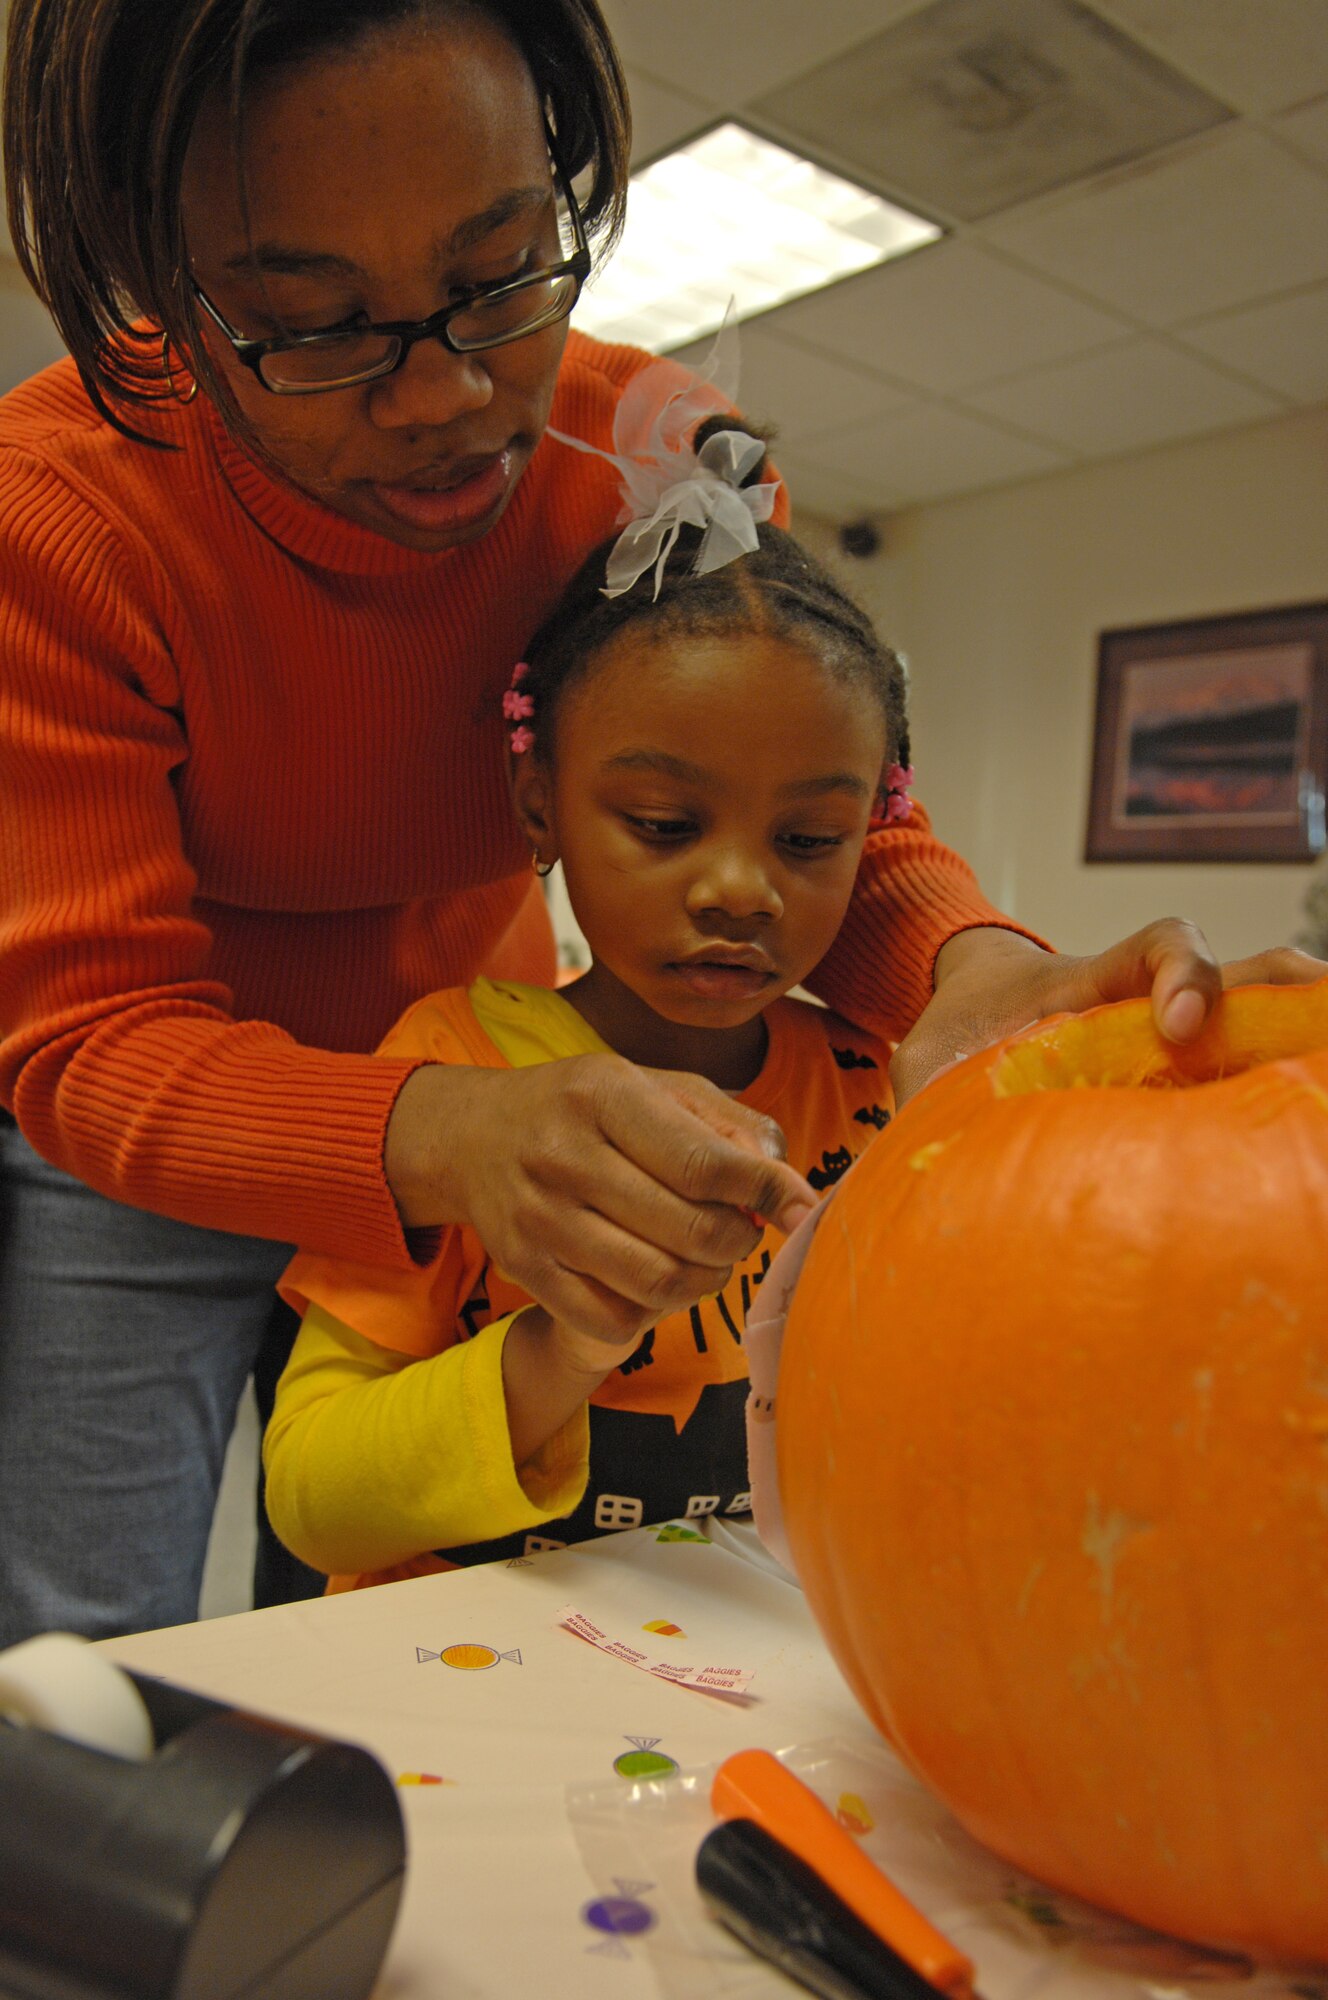 Dedra Tate helps her daughter, Sydney carve a pumpkin during a class at the Airman and Family Readiness Center Oct. 30, 2009, Eielson Air Force Base, Alaska. The pumpkin carving class is one of the many different classes the Airman and Family Readiness Center offers for Airmen and their families. Dedra and Sydney are the family of Maj. Mark Tate, 354th Logistics Readiness Squadron commander. (U.S. Air Force photo/Airman 1st Class Rachelle Coleman)